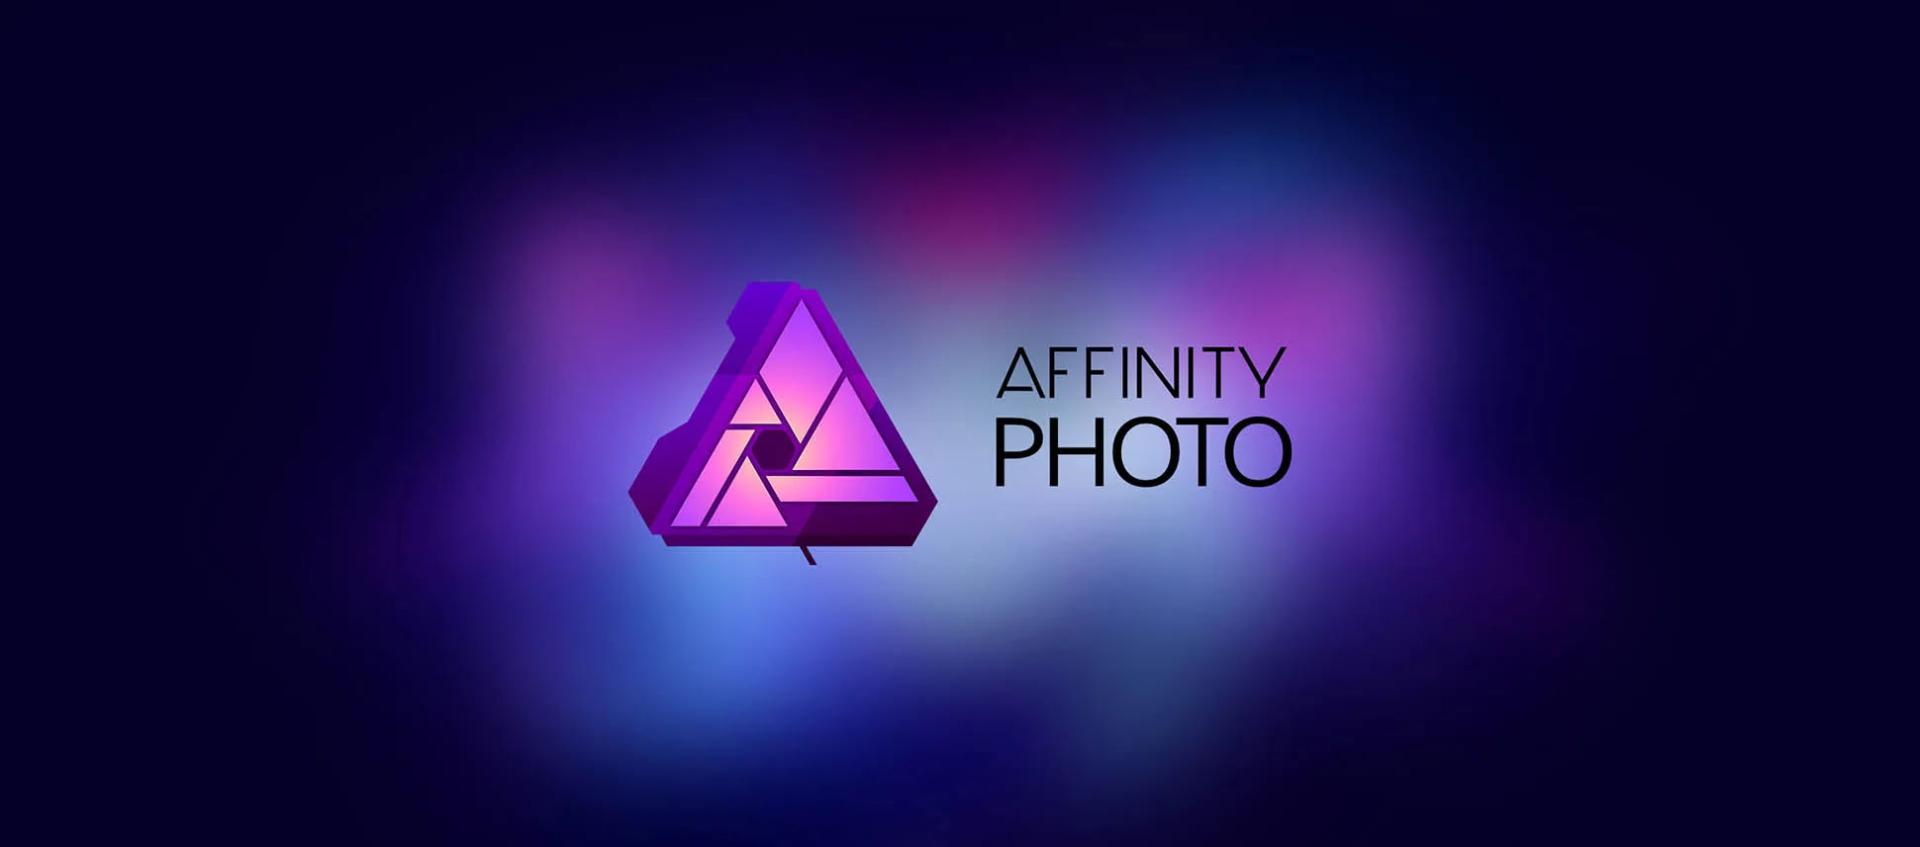 Review: Affinity Photo